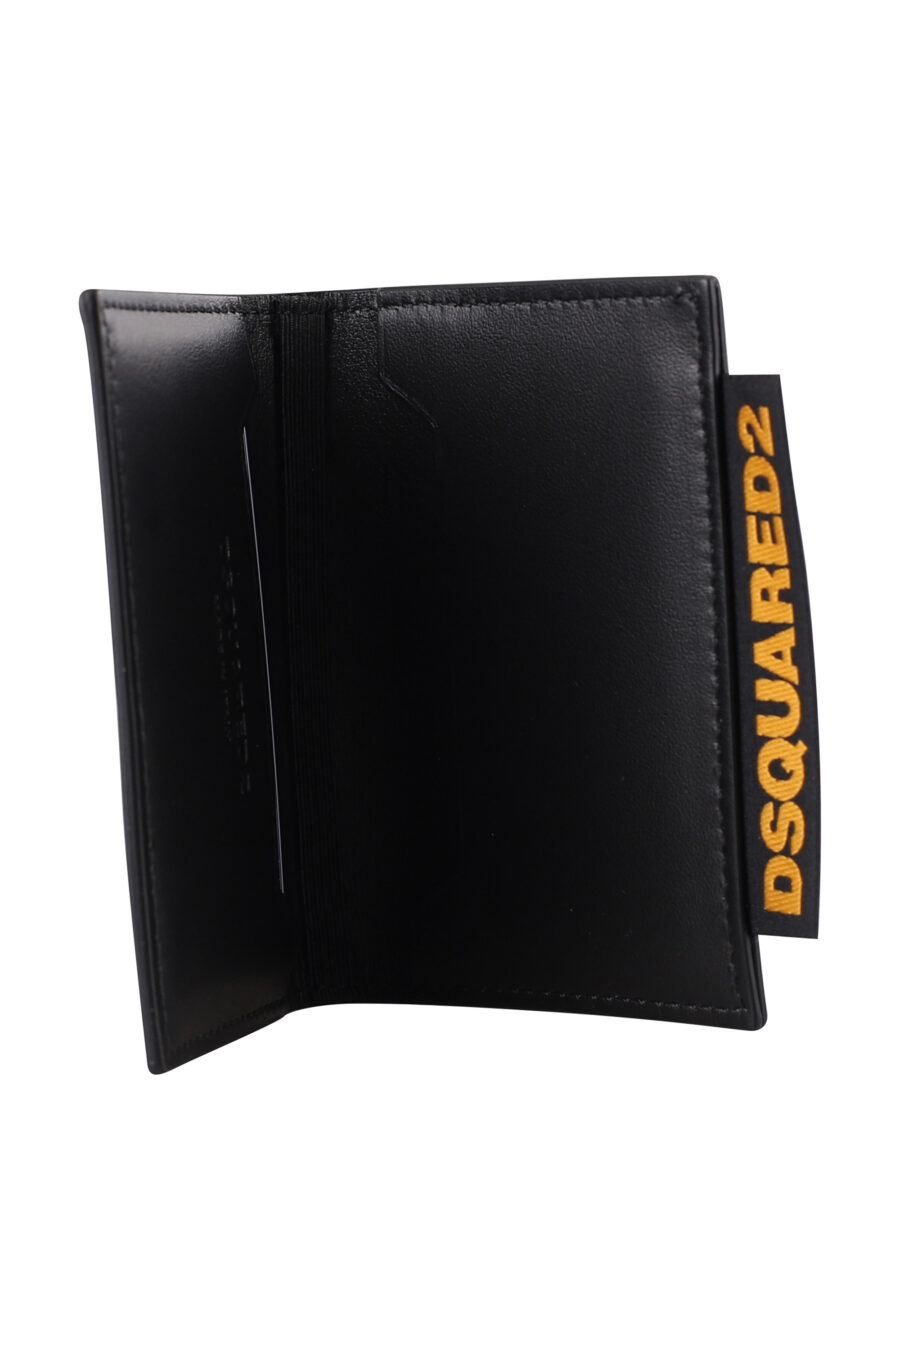 Black card holder with yellow label and logo - IMG 1276